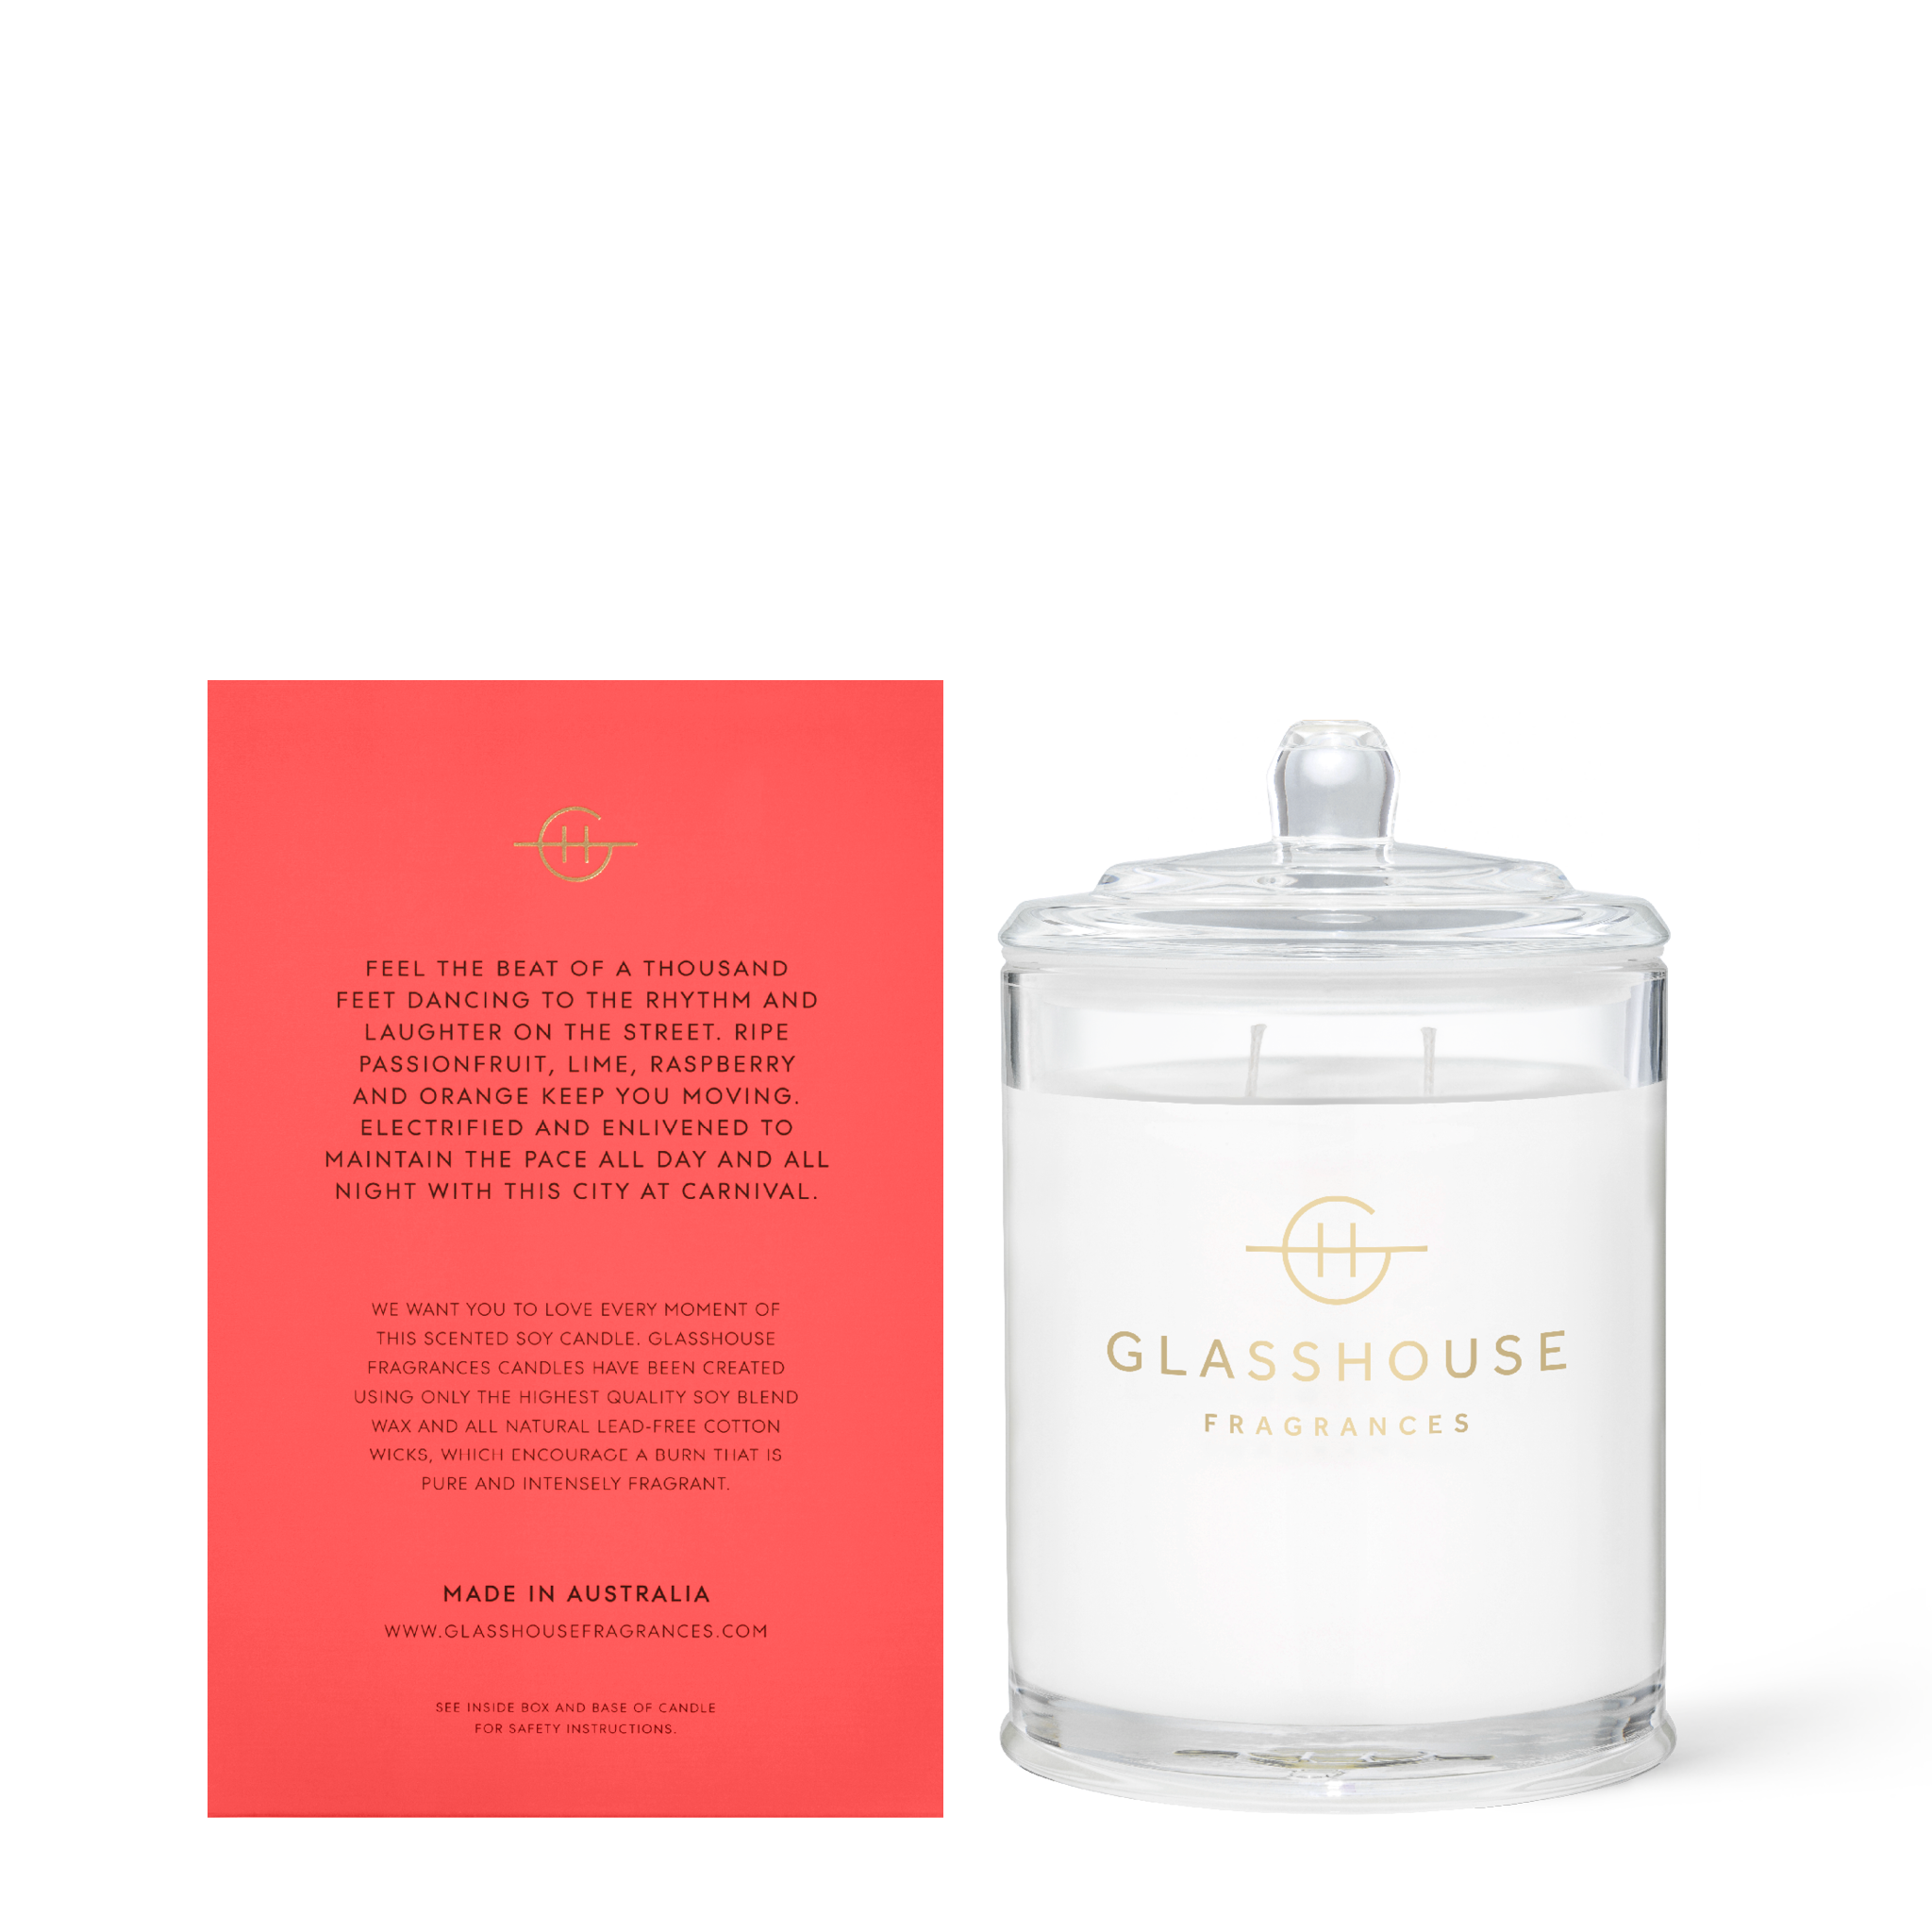 Glasshouse Fragrances One Night in Rio Passionfruit and Lime 380g Soy Candle with box - back of product shot